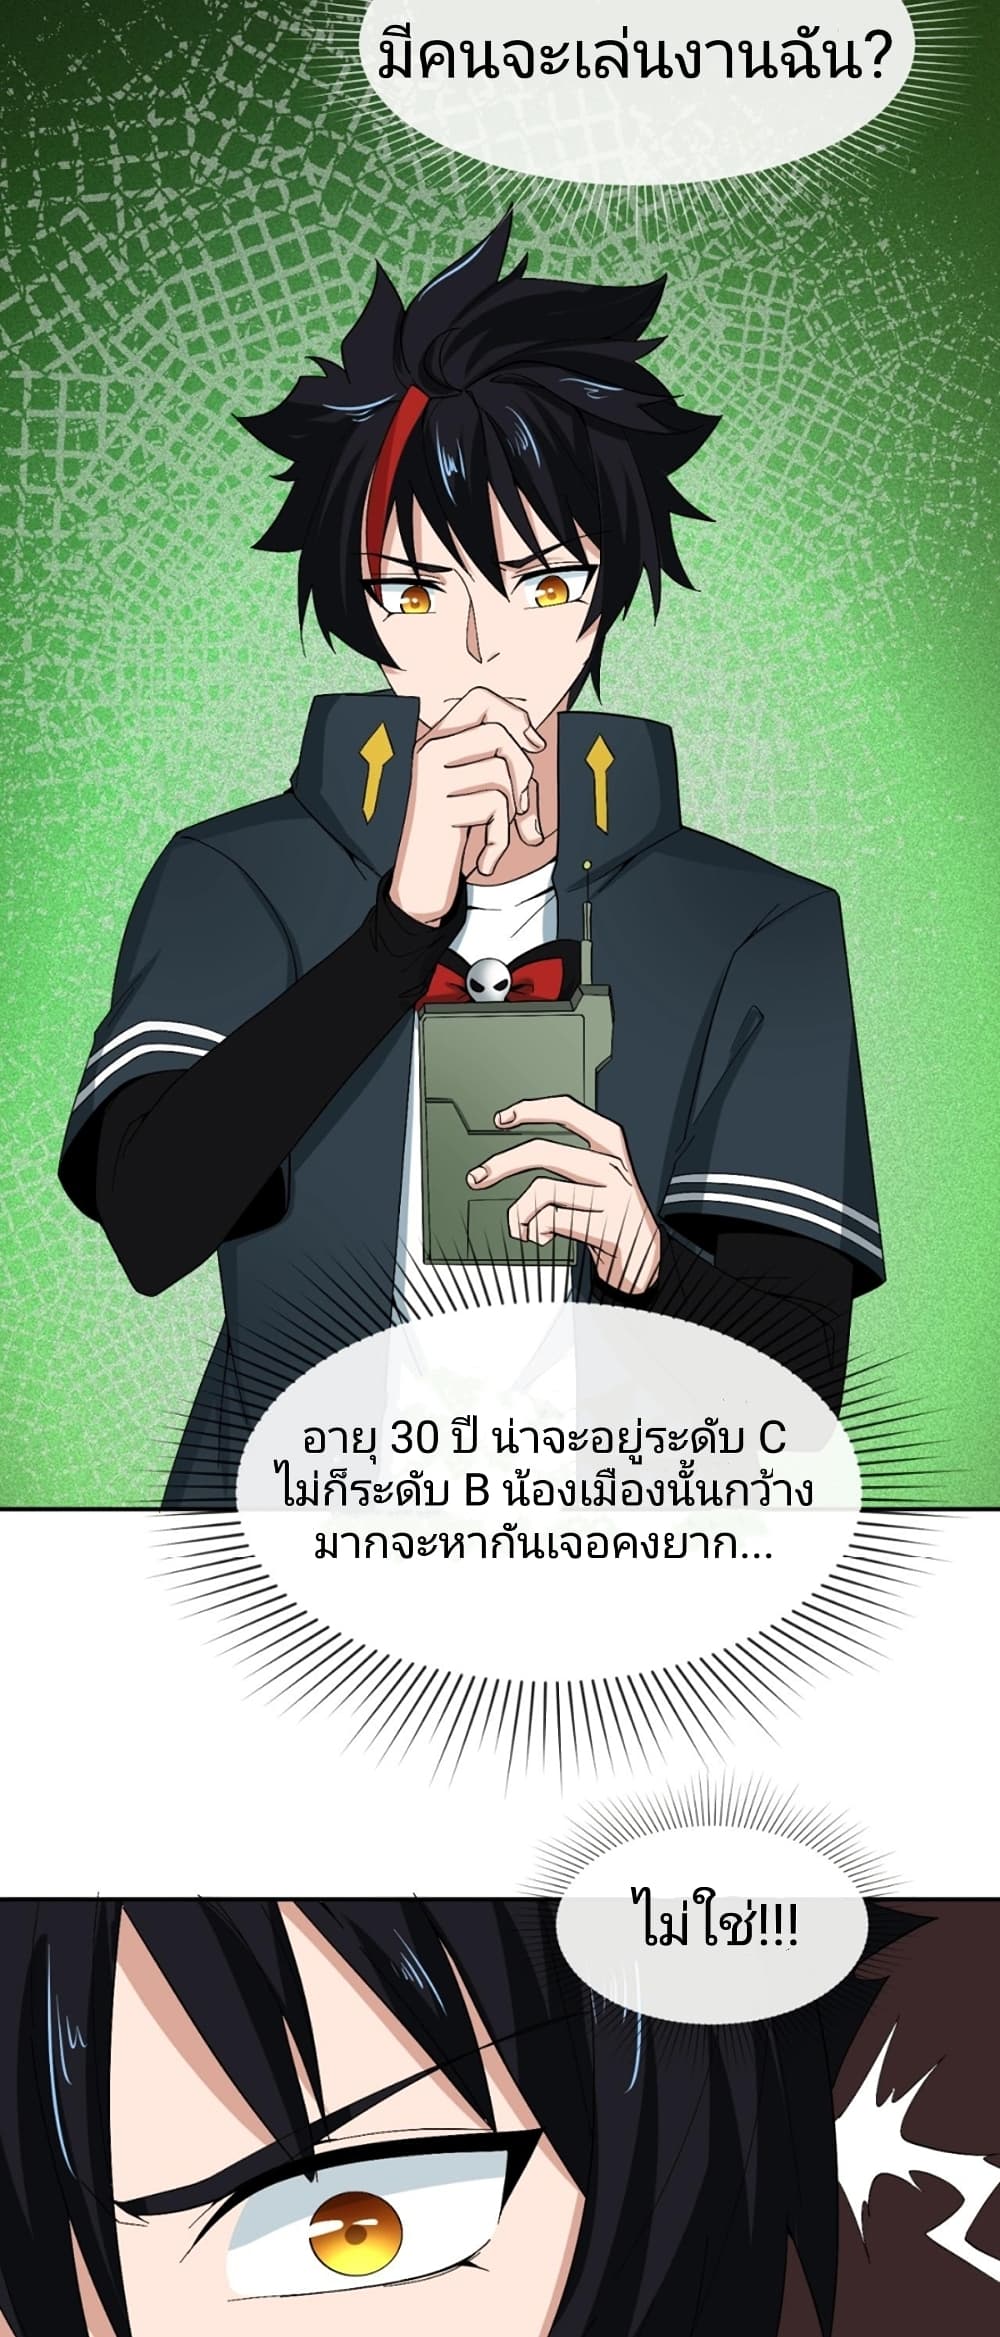 The Age of Ghost Spirits à¸à¸­à¸à¸à¸µà¹ 9 (15)